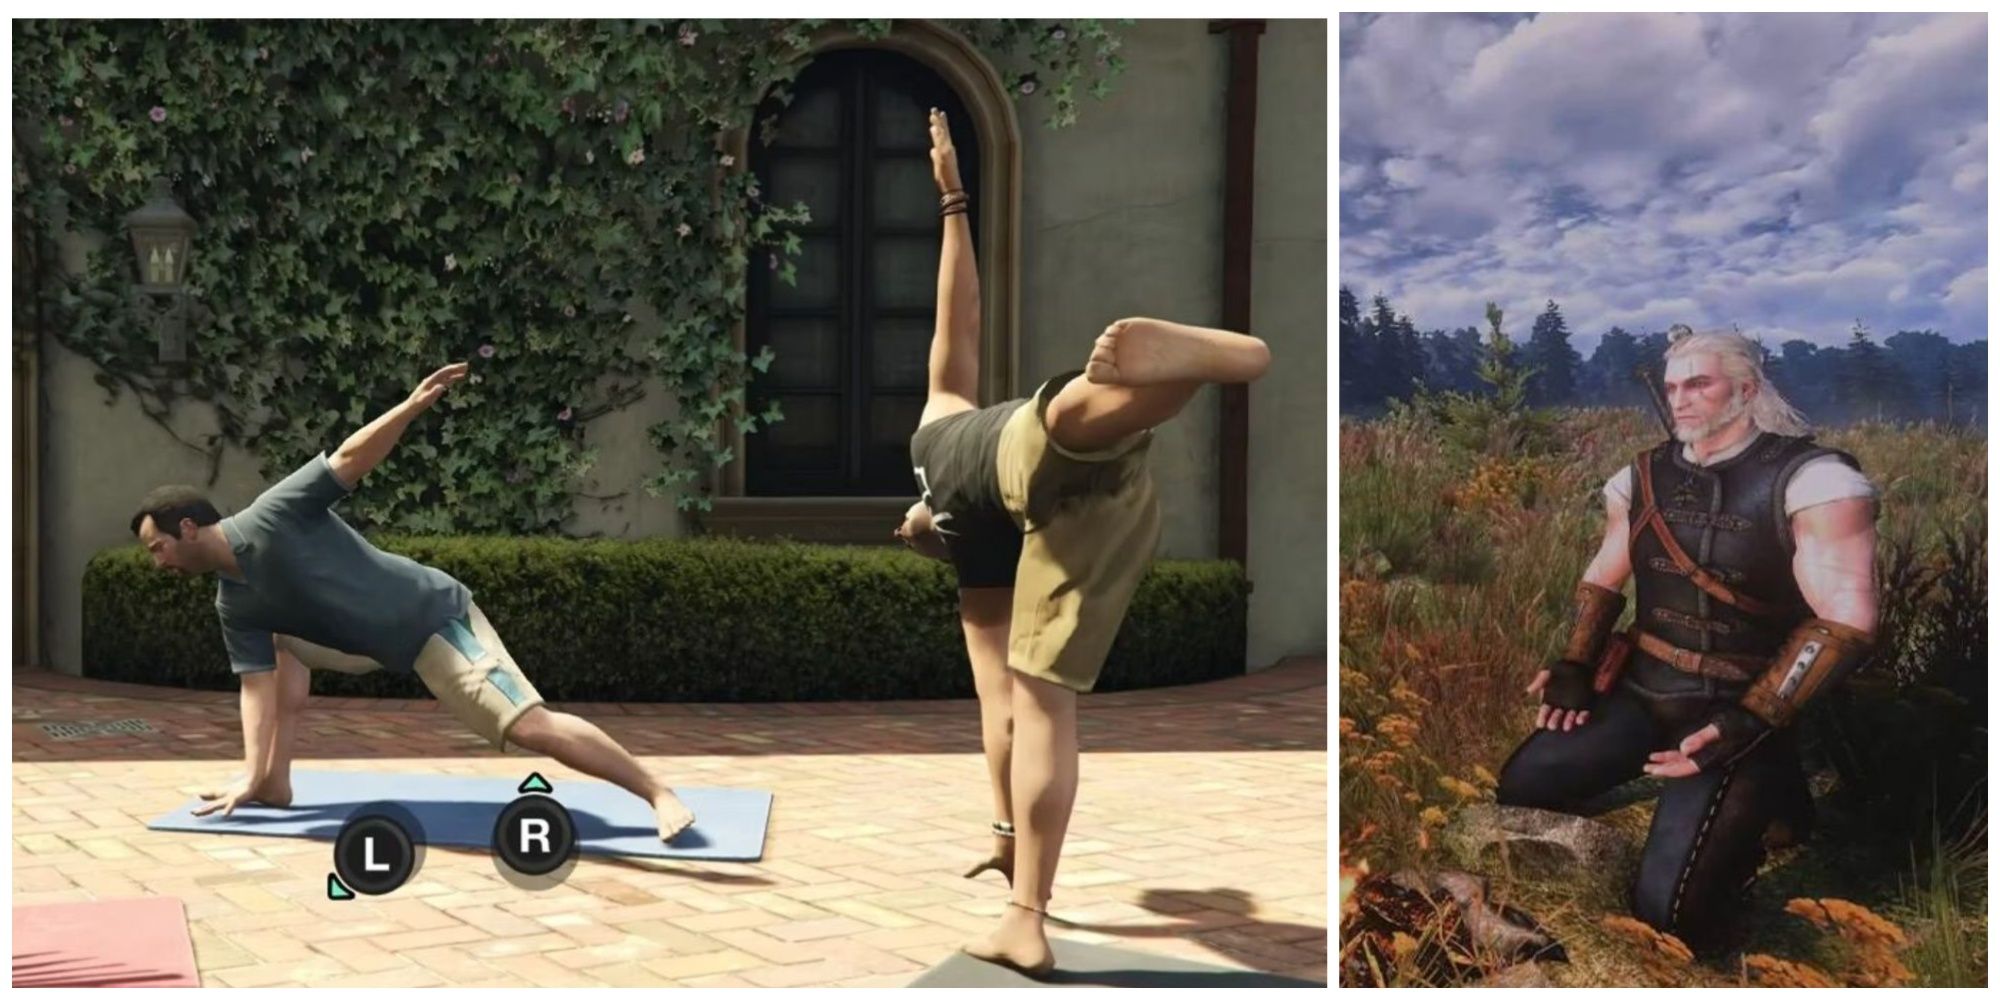 Left: Two men practicing Yoga on outside on the patio in the sun. Right: Geralt of Rivia meditating in an open field.